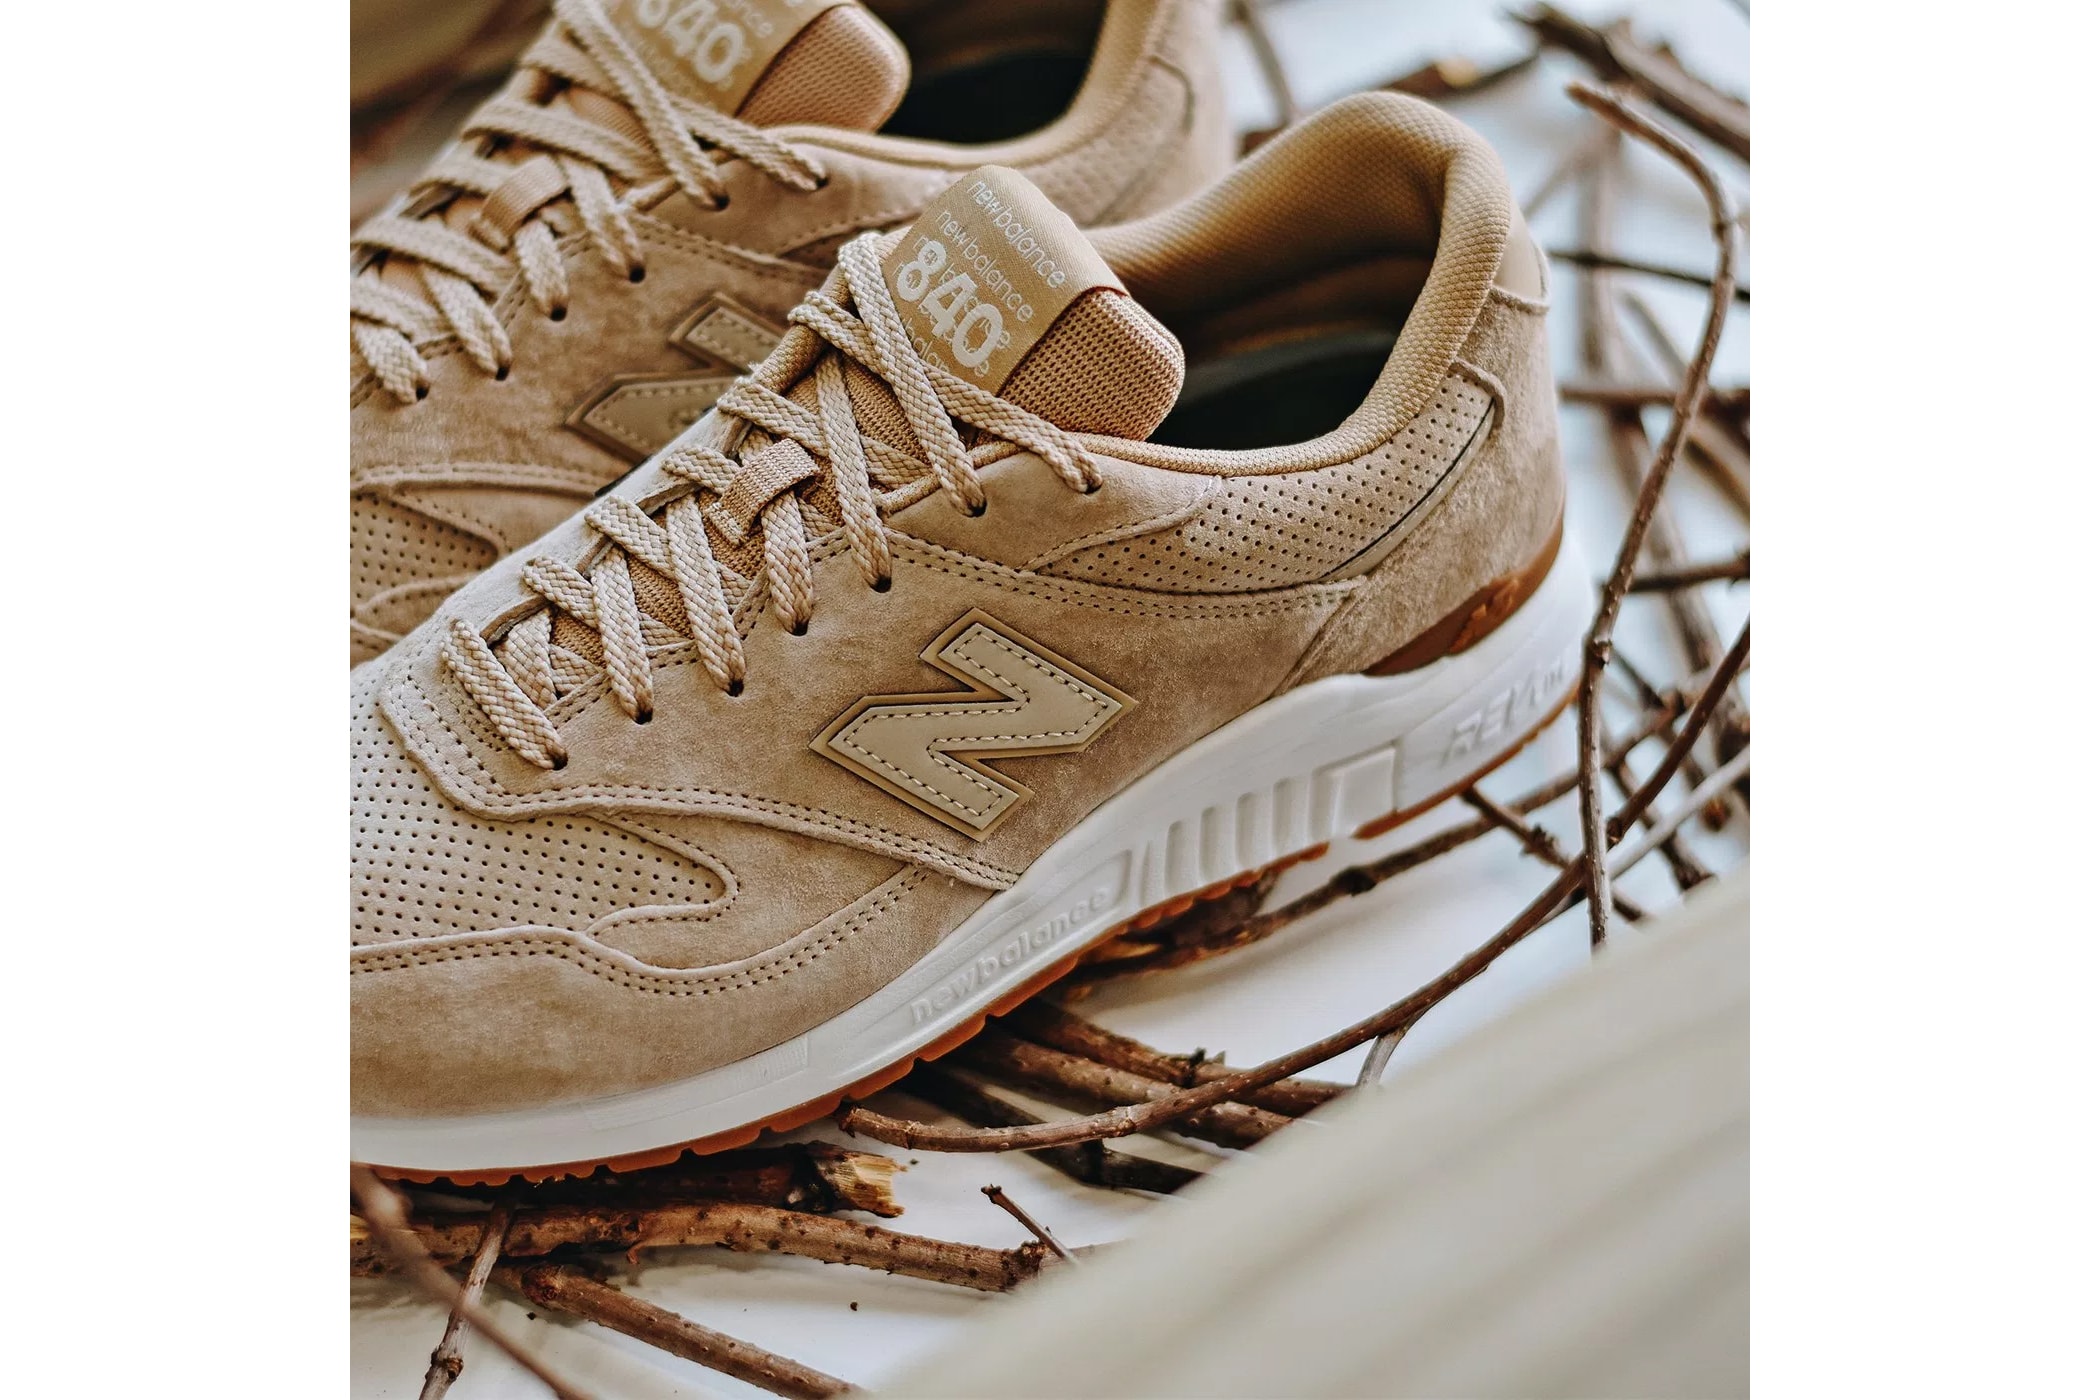 New Balance 840 "Tan" available now purchase